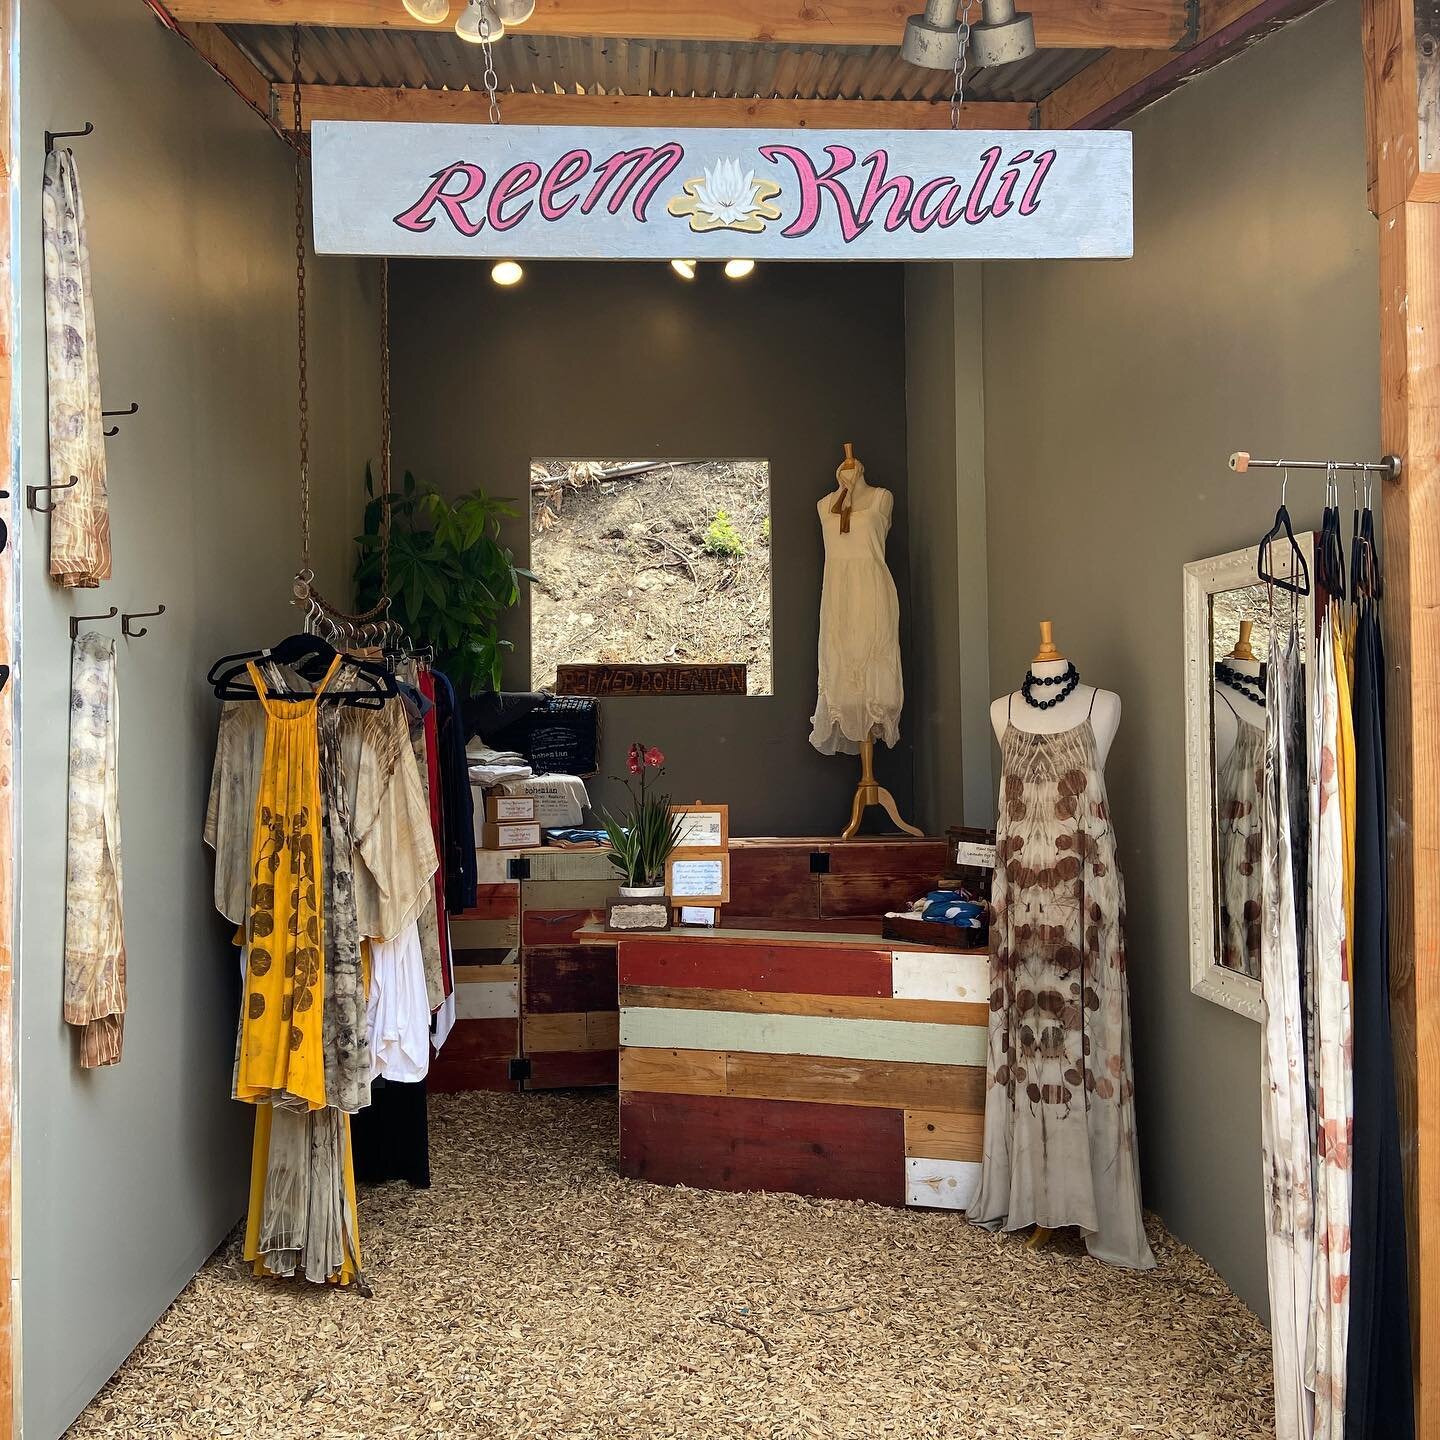 Summer&rsquo;s here @sawdustartfestival! First day of festival&hellip;come see me at booth 517 #therefinedbohemian #refinedbohemian #sawdustfestival #sawdustartfestival #artshow #makerspace #lagunabeachcalifornia